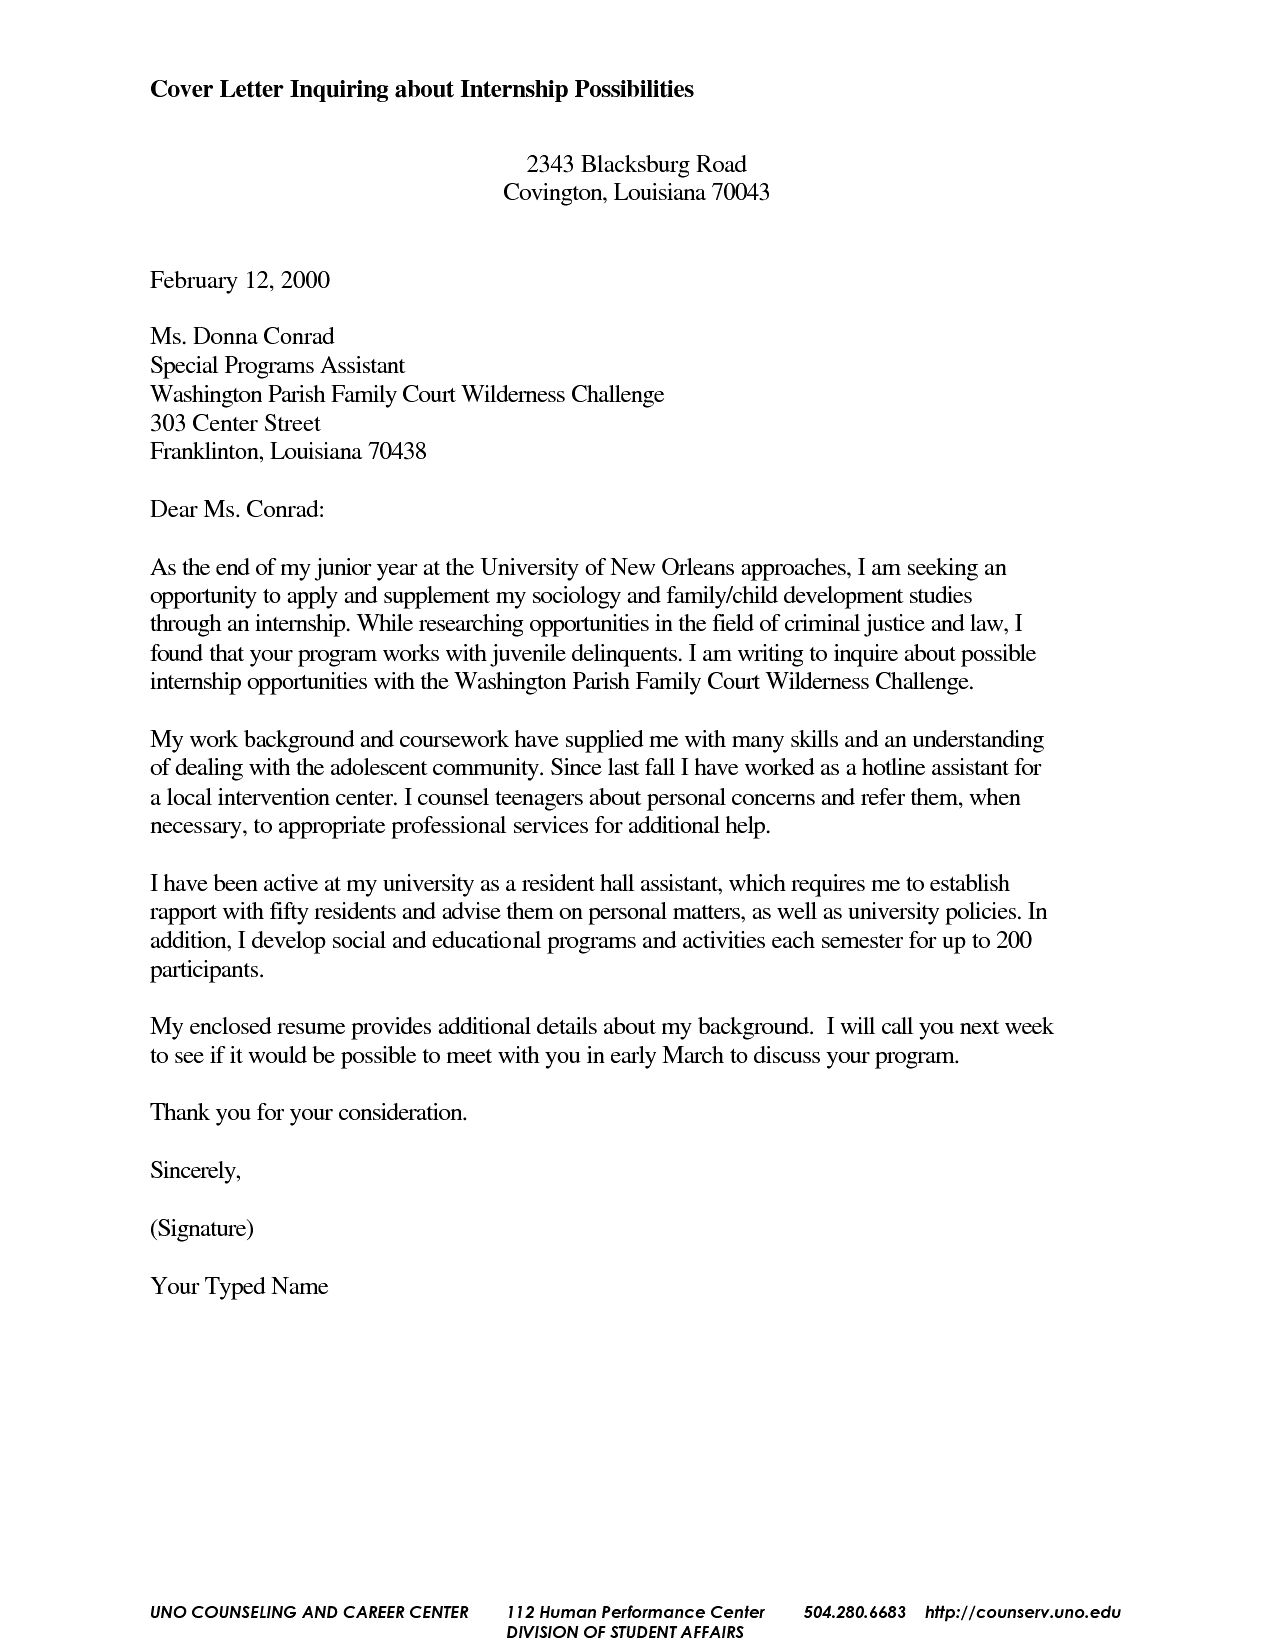 Contract Cancellation Letter Template Free - Email Contract Template with Cover Letter Contract Termination